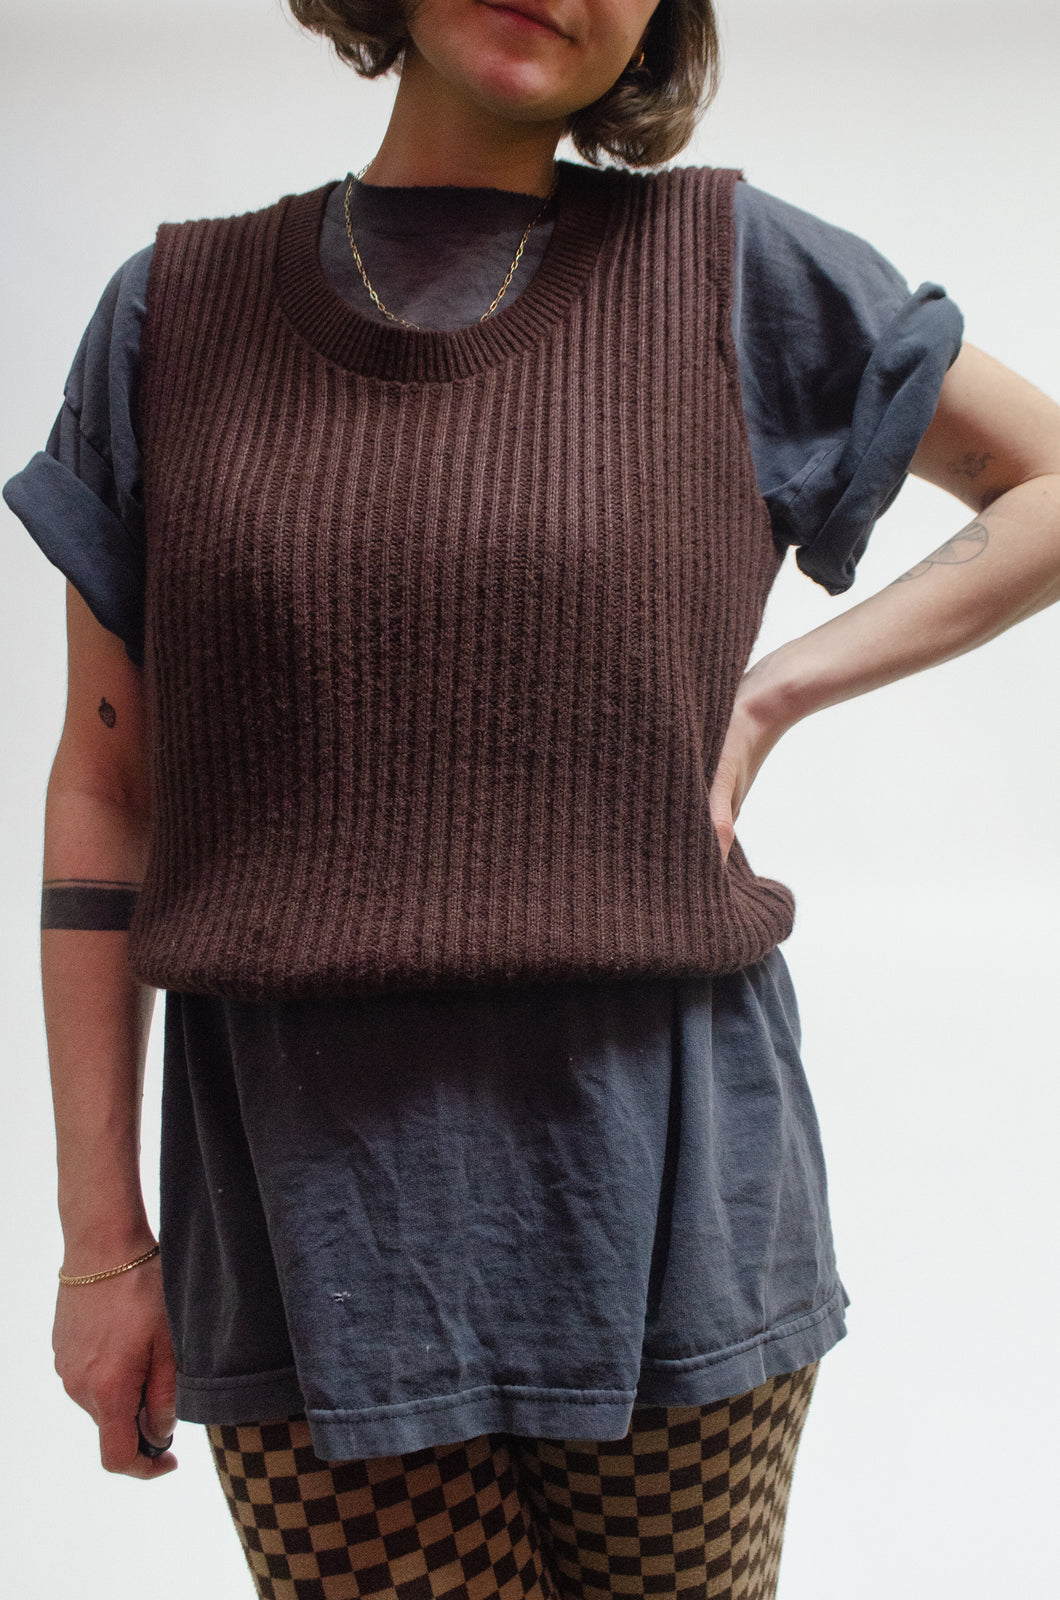 Chocolate brown sweater vest